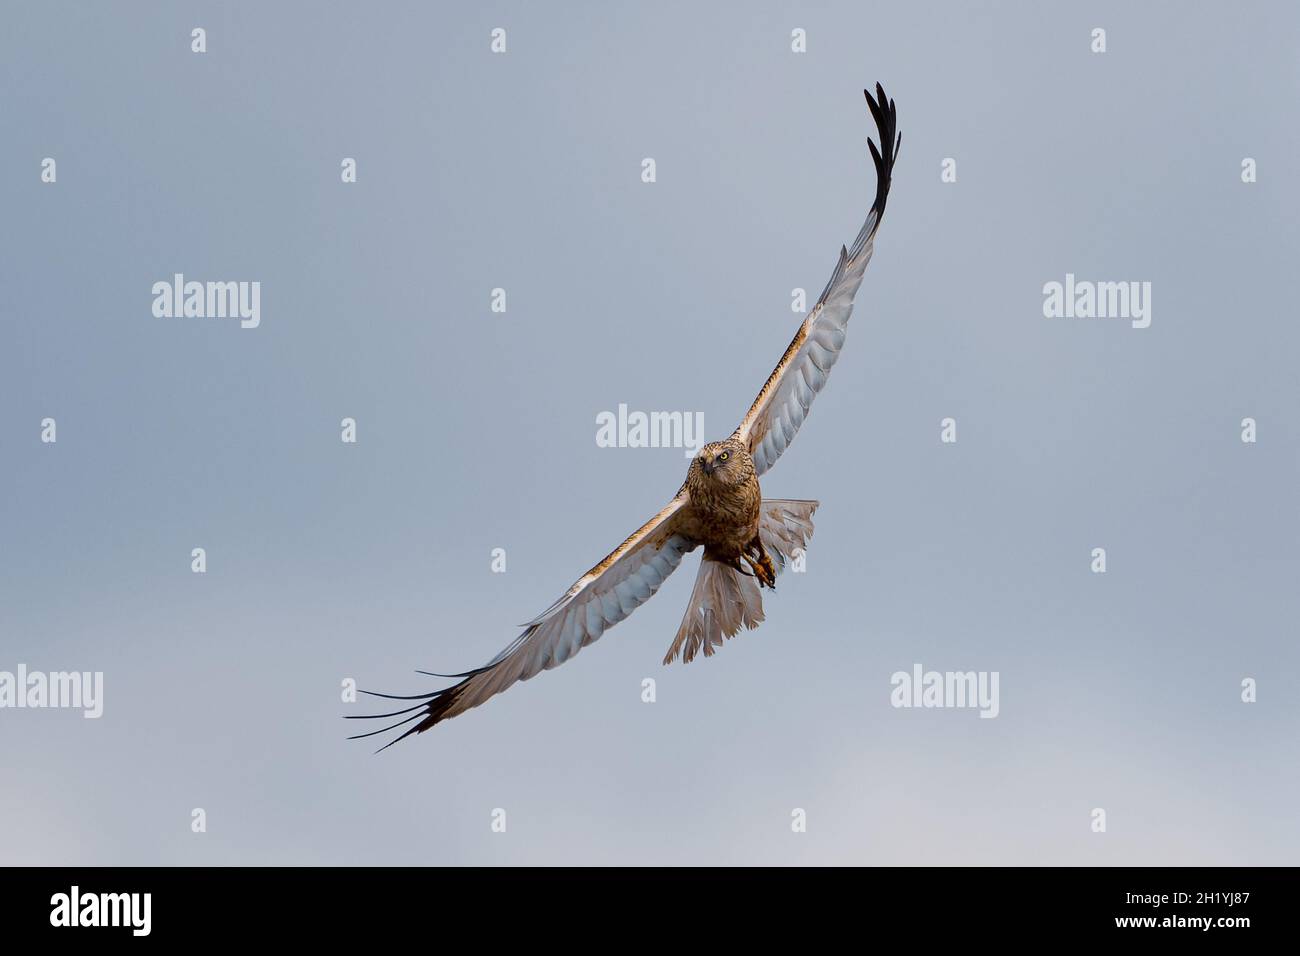 Western marsh harrier searching for a prey in the sky Stock Photo